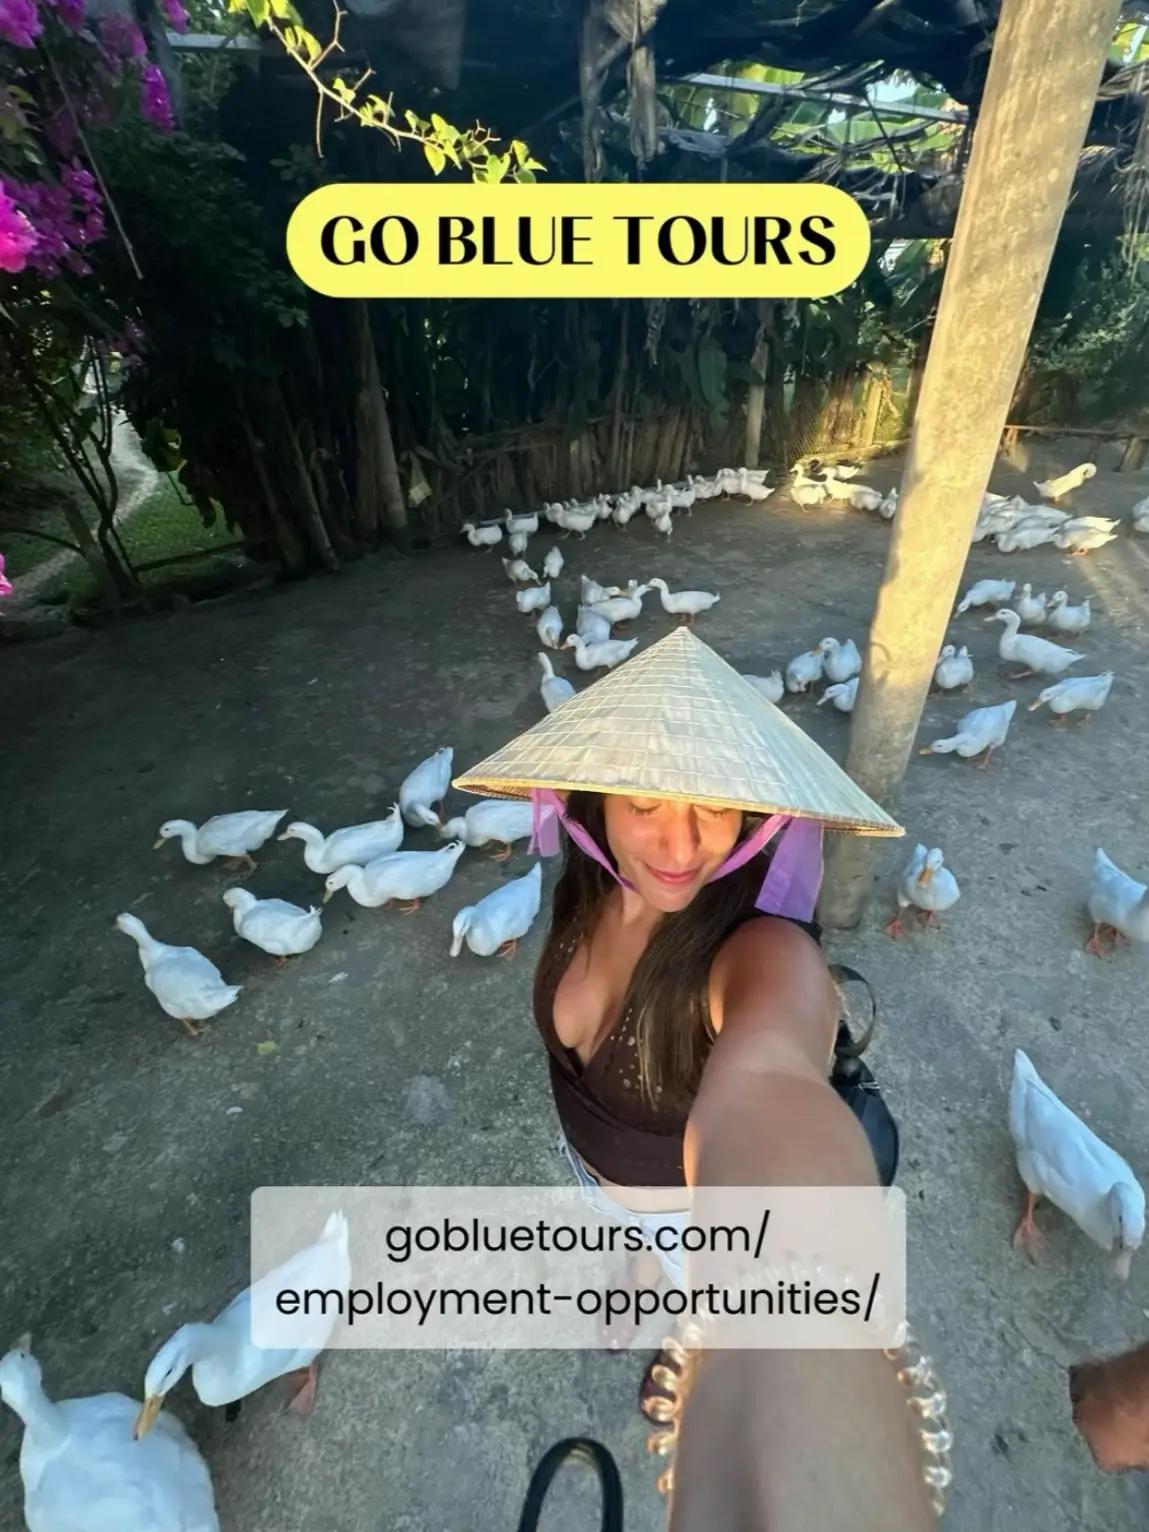  A woman wearing a blue hat and a purple shirt is standing in front of a group of birds.